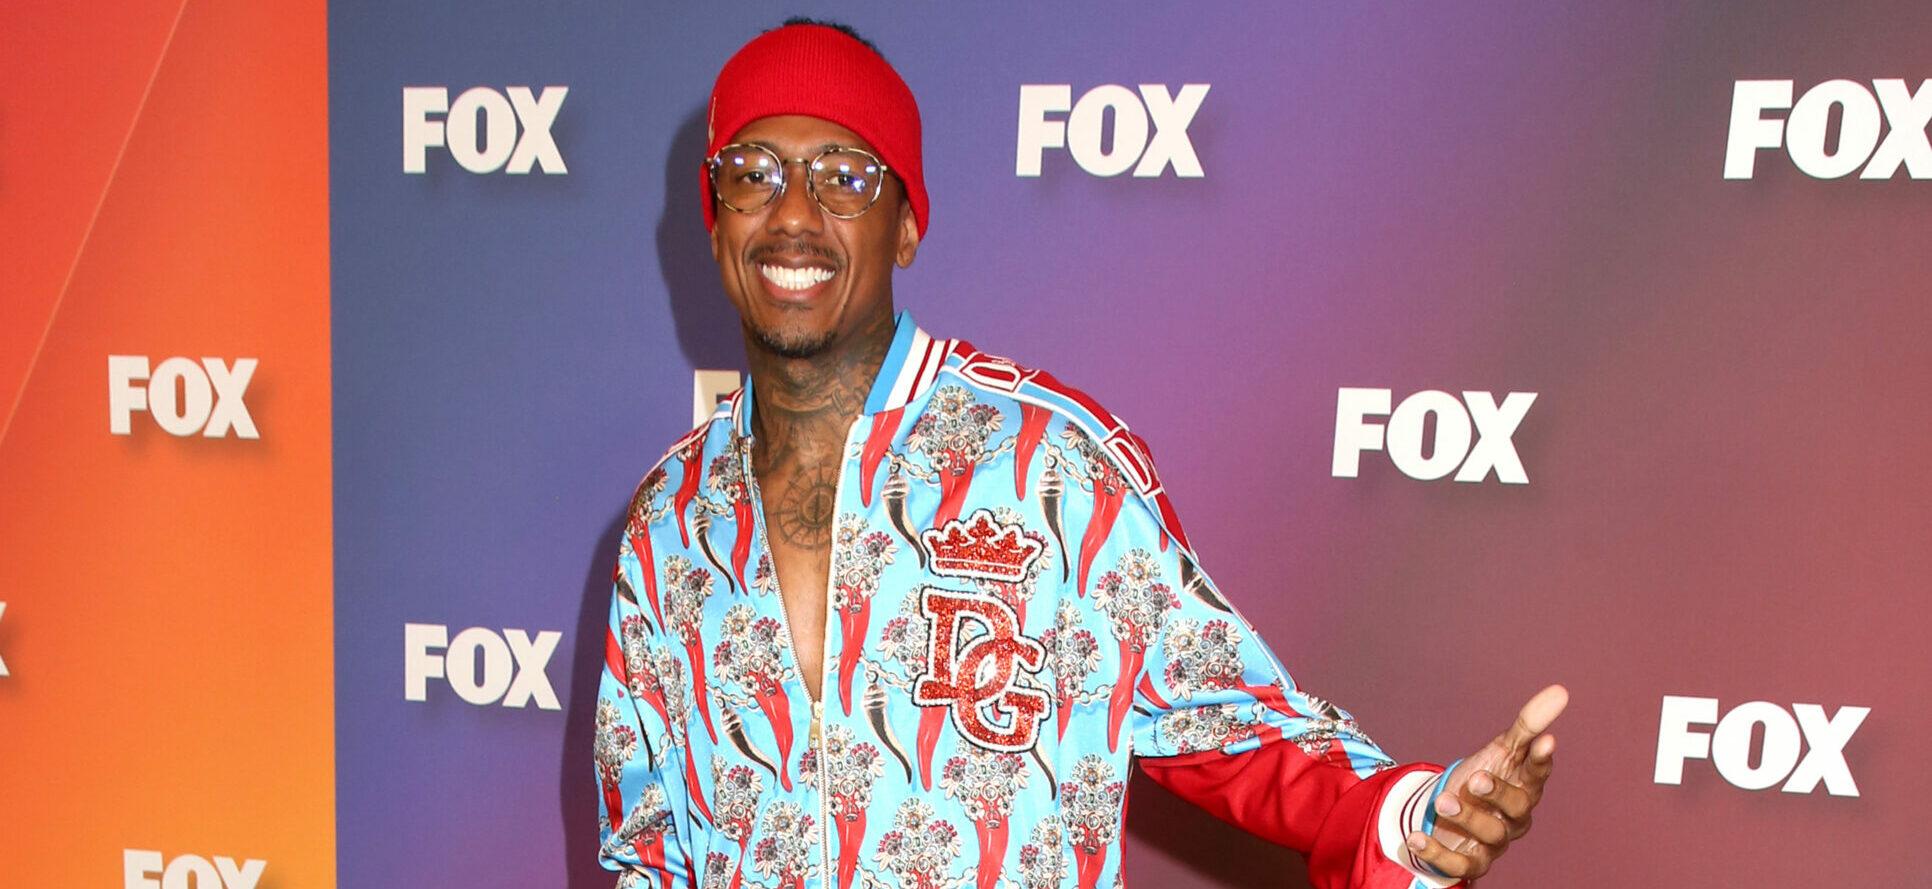 Nick Cannon Claims ‘God Decides’ When He’ll Stop Having More Kids